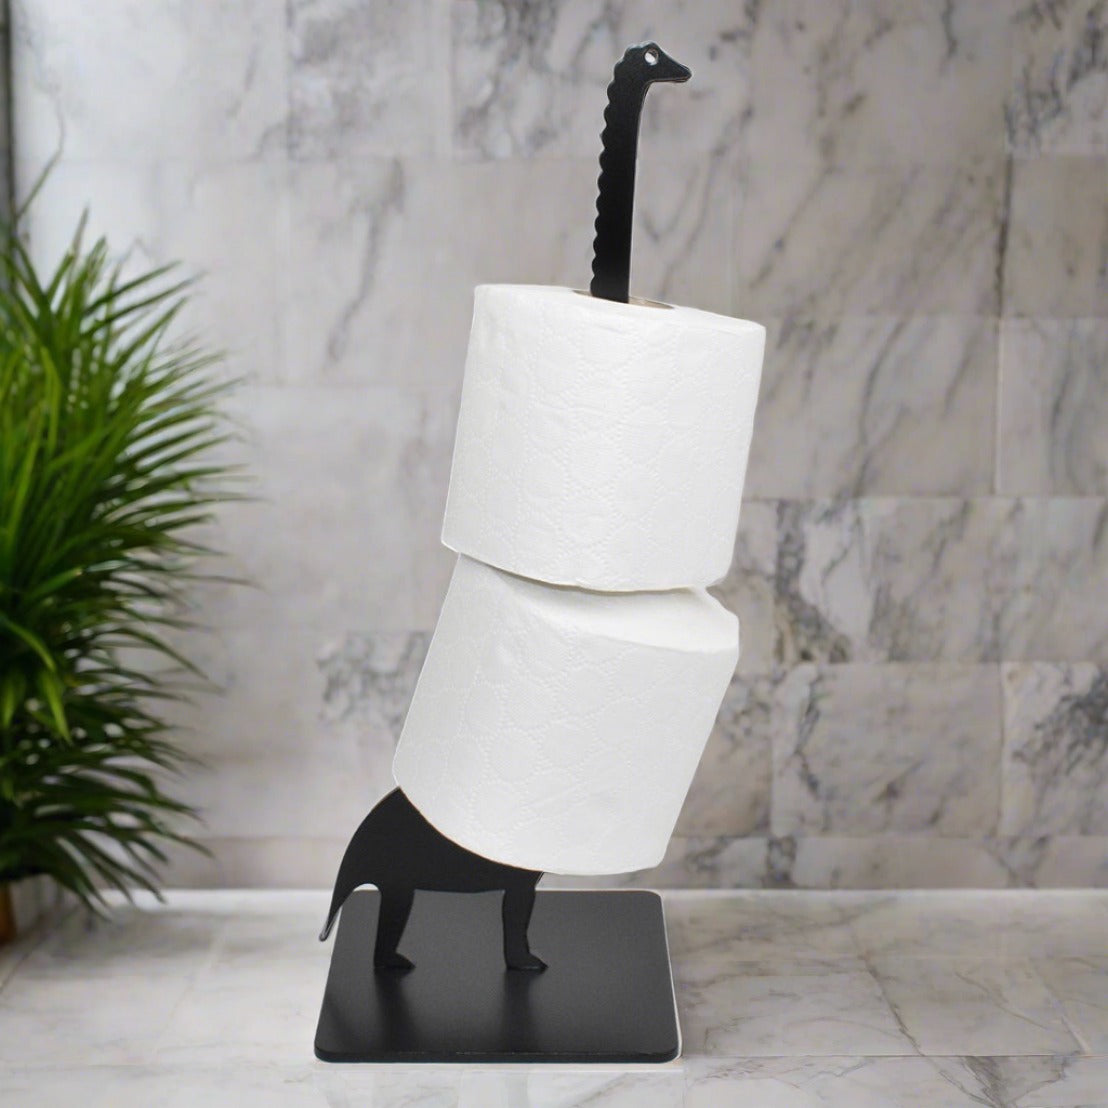 Okunaii Quirky Creature Toilet Roll Holder - Indoor Outdoors